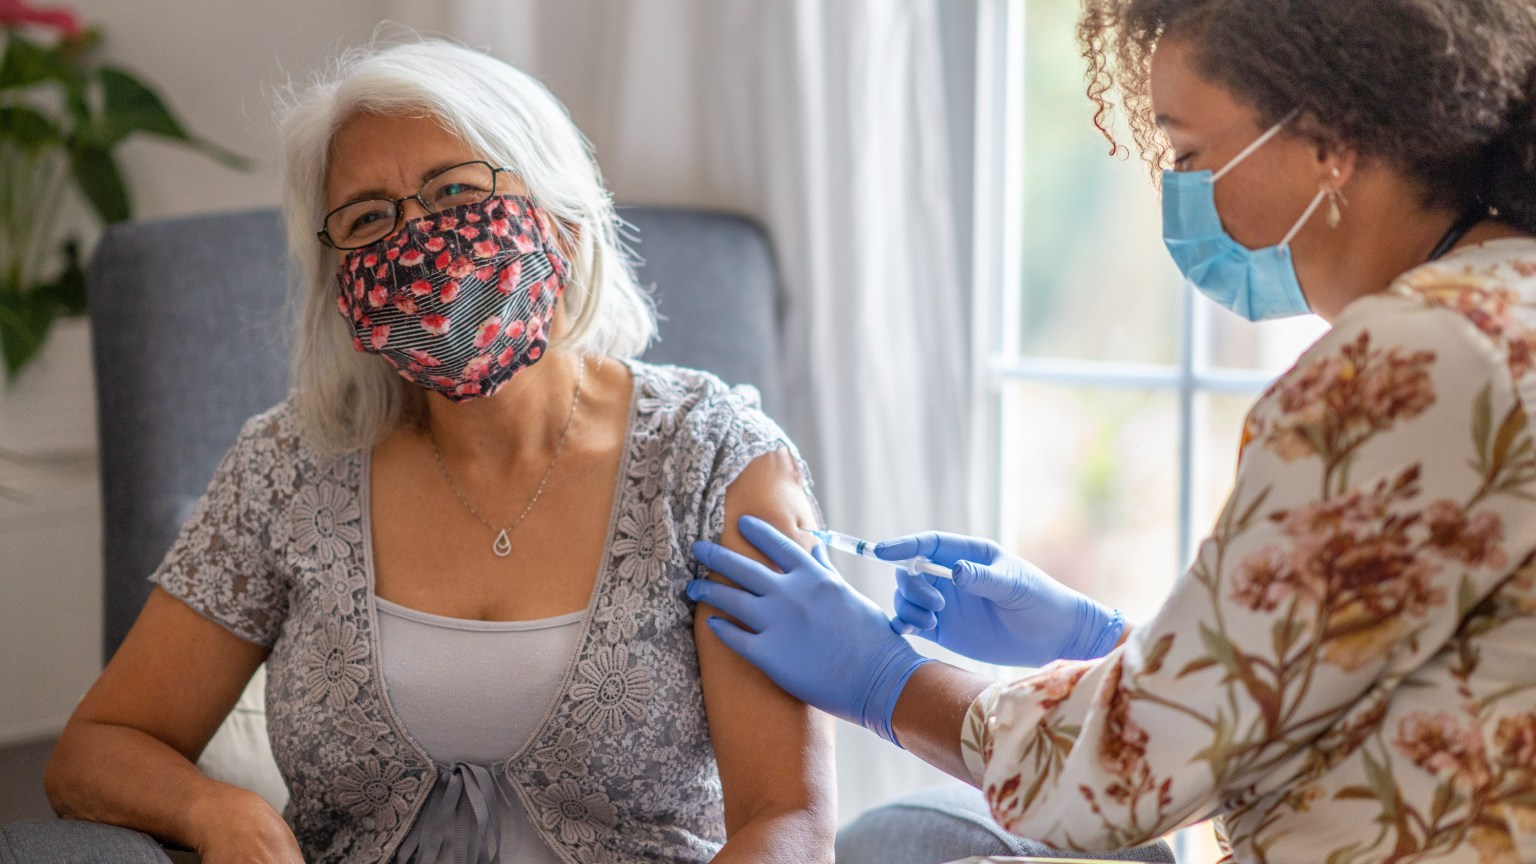 public health worker administers a vaccine in the upper arm of an older woman wearing a facemask